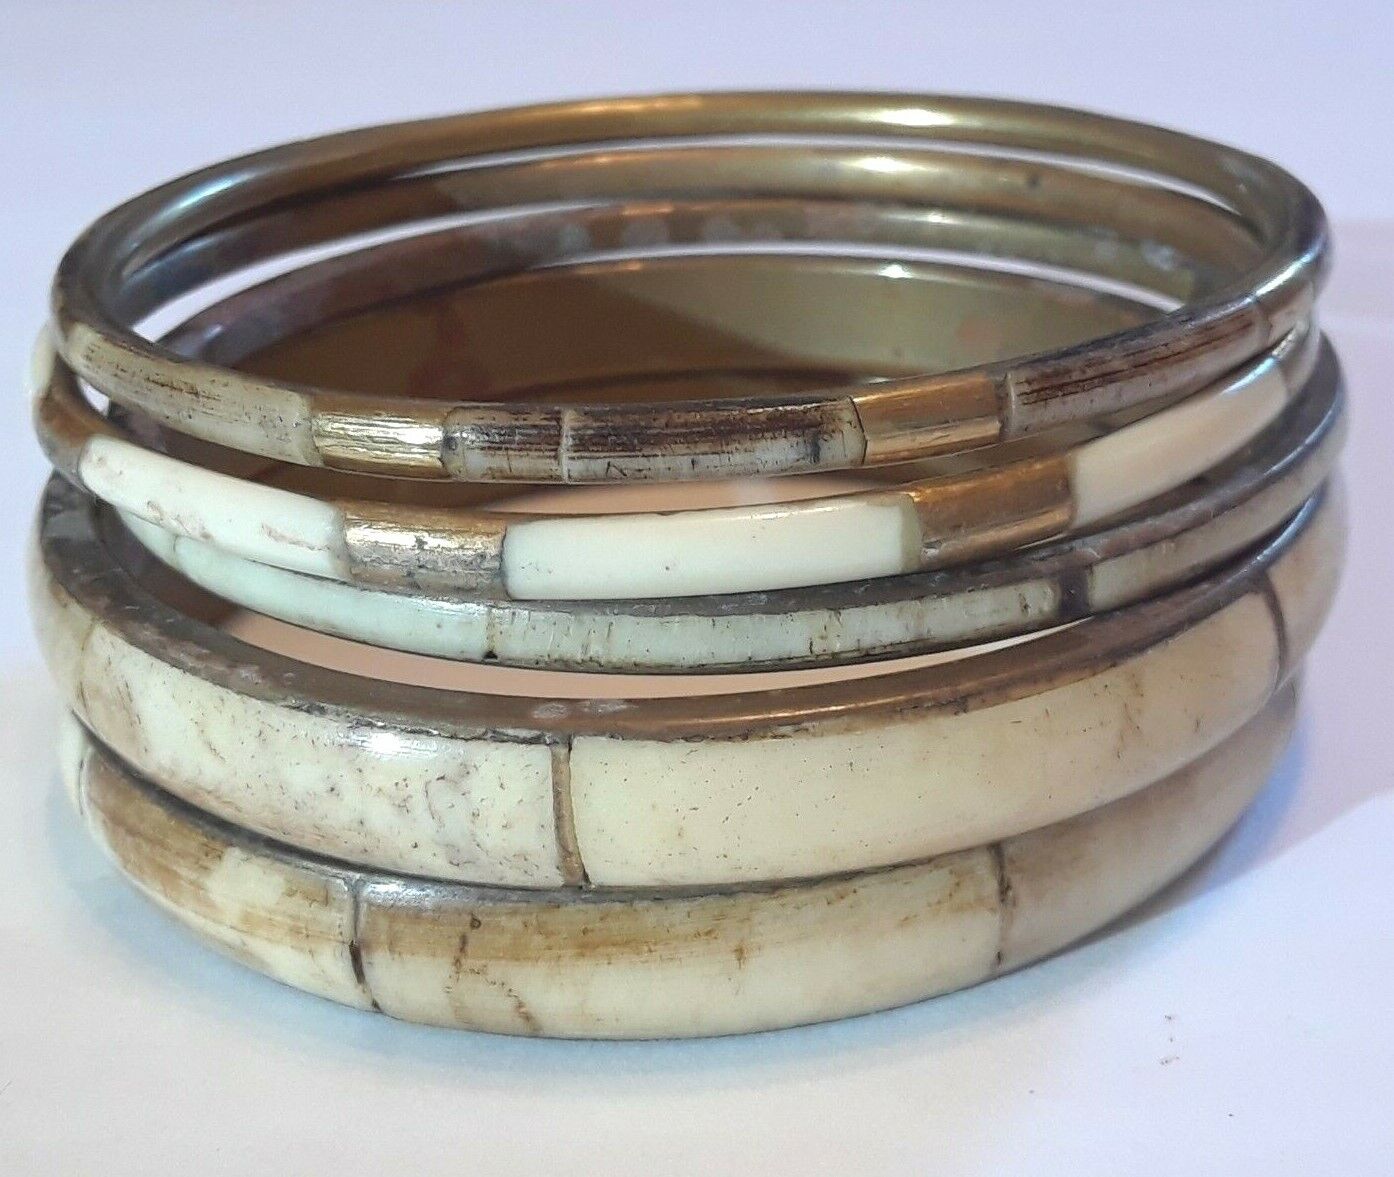 Lot of 5 gold tone bangle bracelets with inlay stone. Made in India. Beautiful! Unbranded